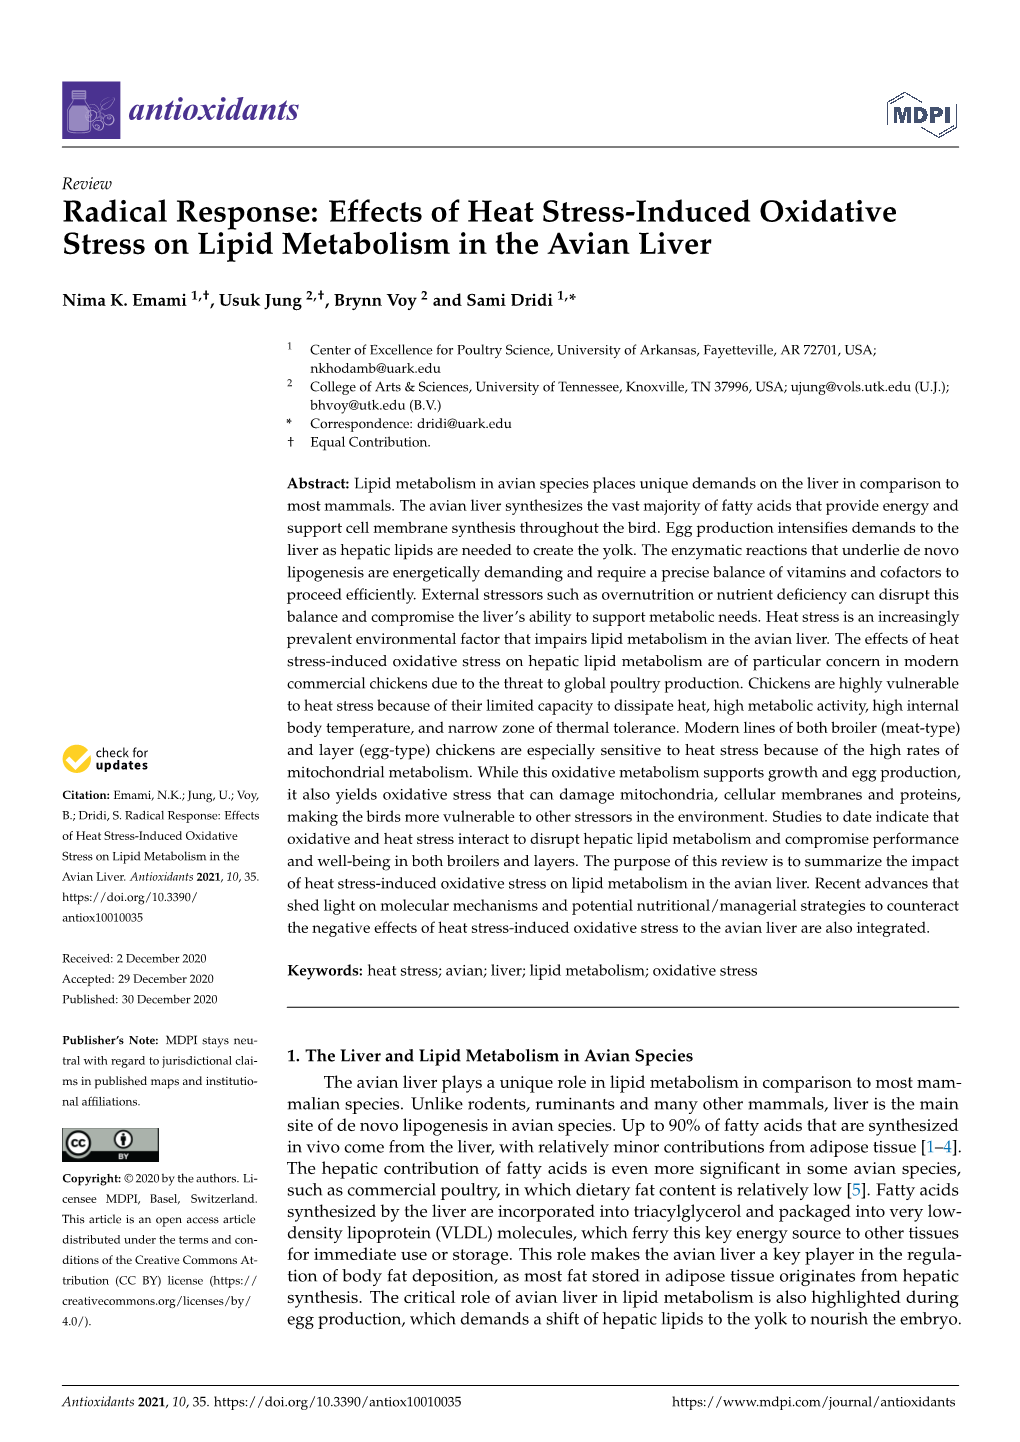 Radical Response: Effects of Heat Stress-Induced Oxidative Stress on Lipid Metabolism in the Avian Liver